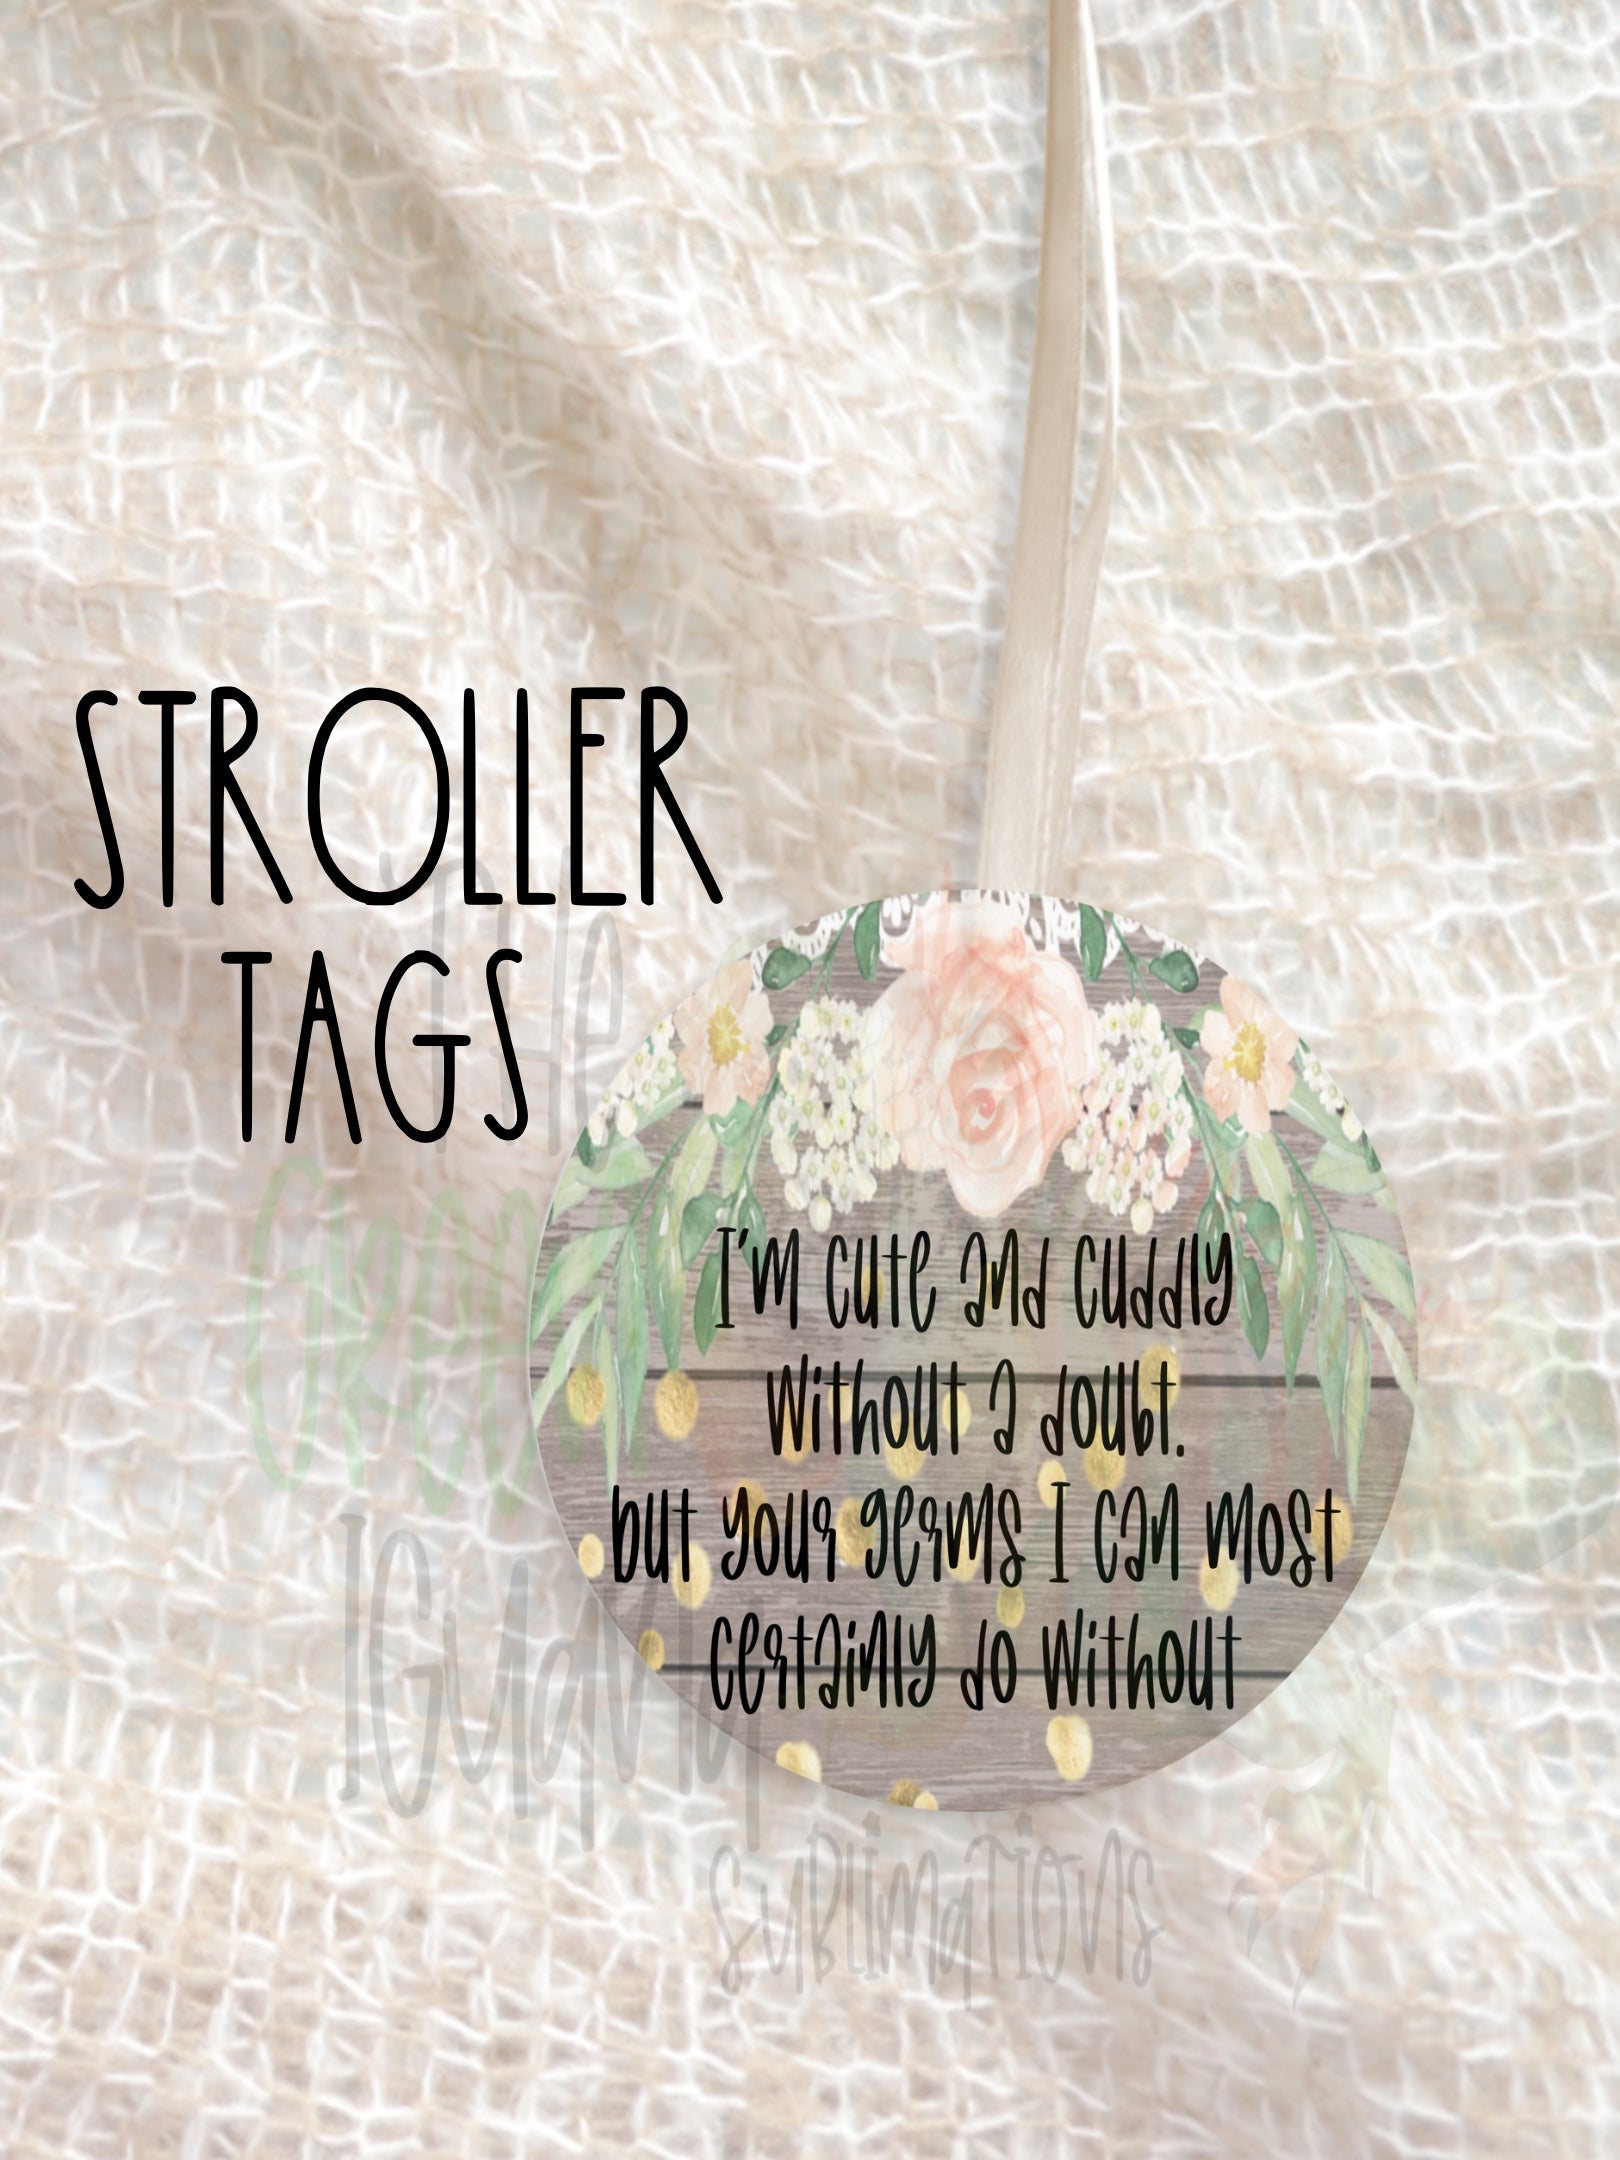 I’m cute and cuddly without a doubt - Stroller tag